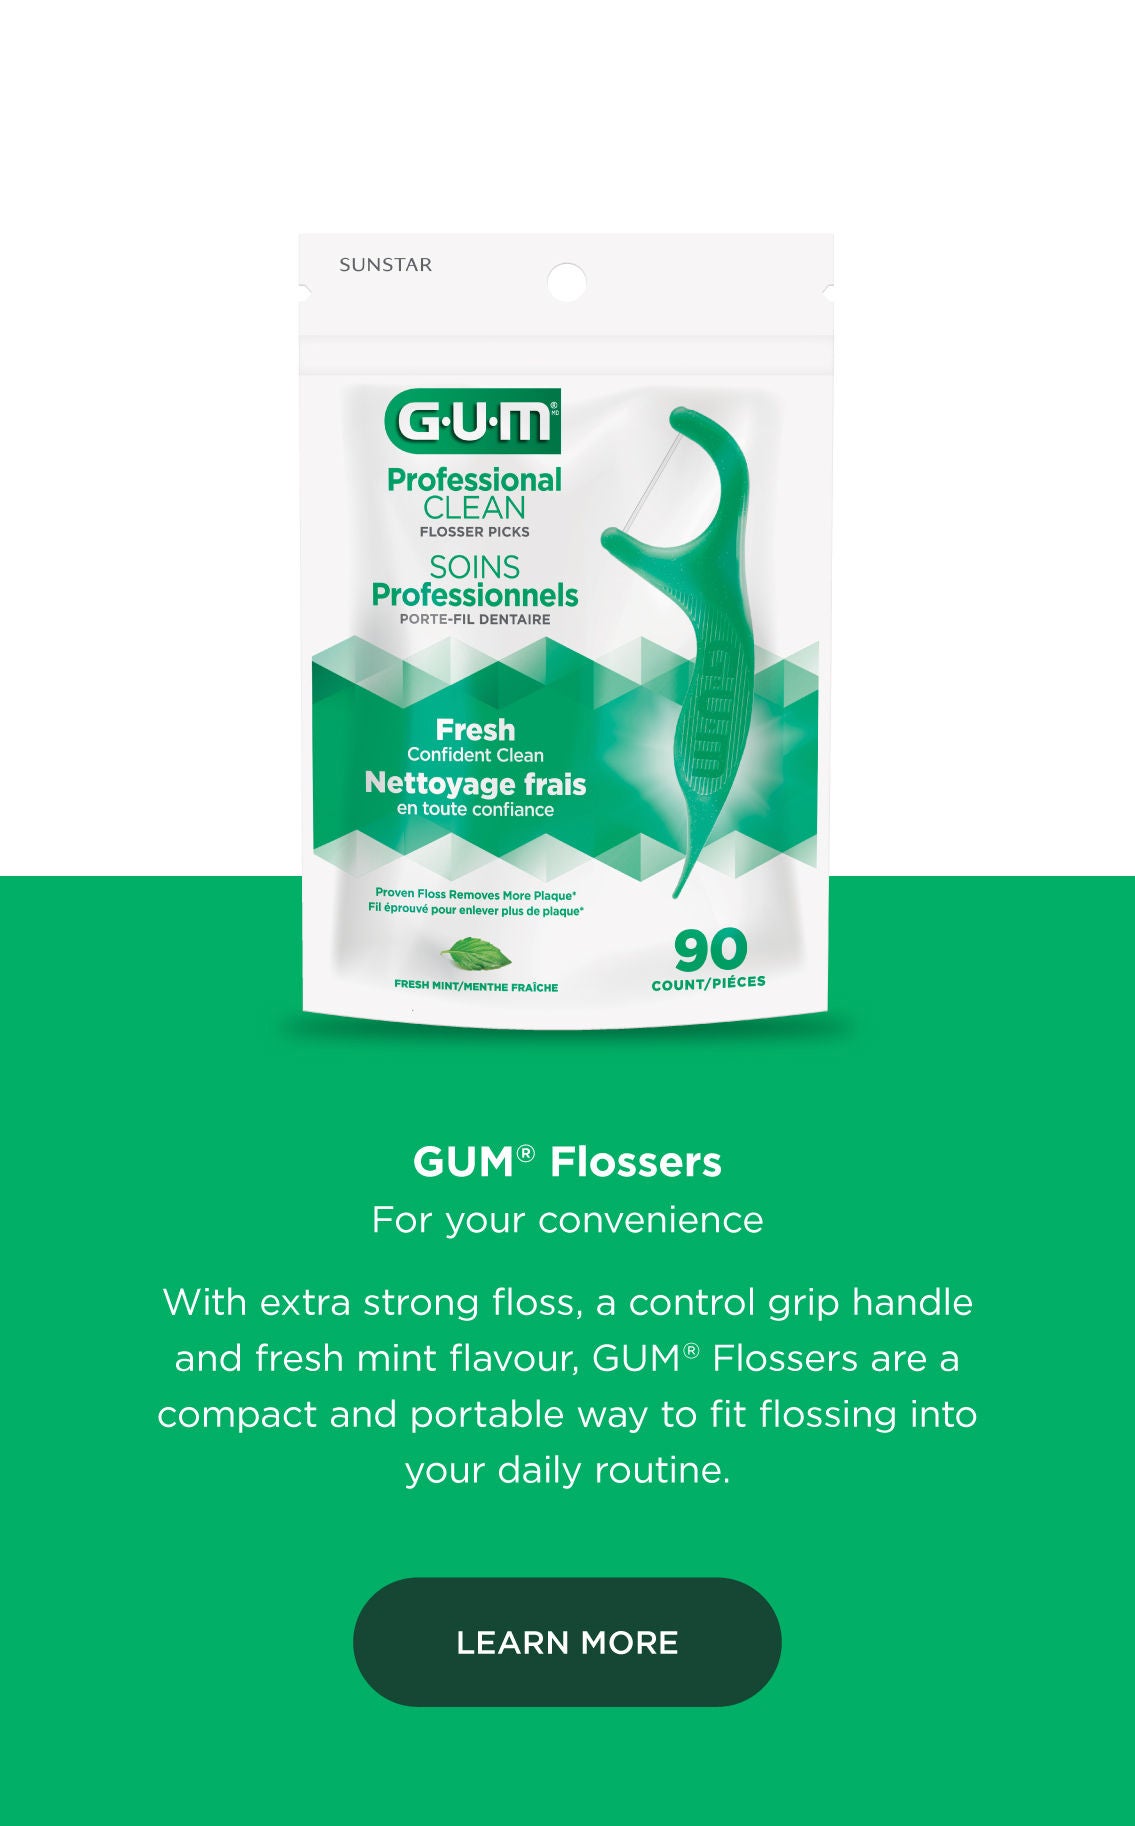 GUM Flosser For your convenience With extra strong floss, a control grip handle and fresh mint flavour, GUM flossers are a compact and portable way to fit flossing into your daily routine.  Learn More